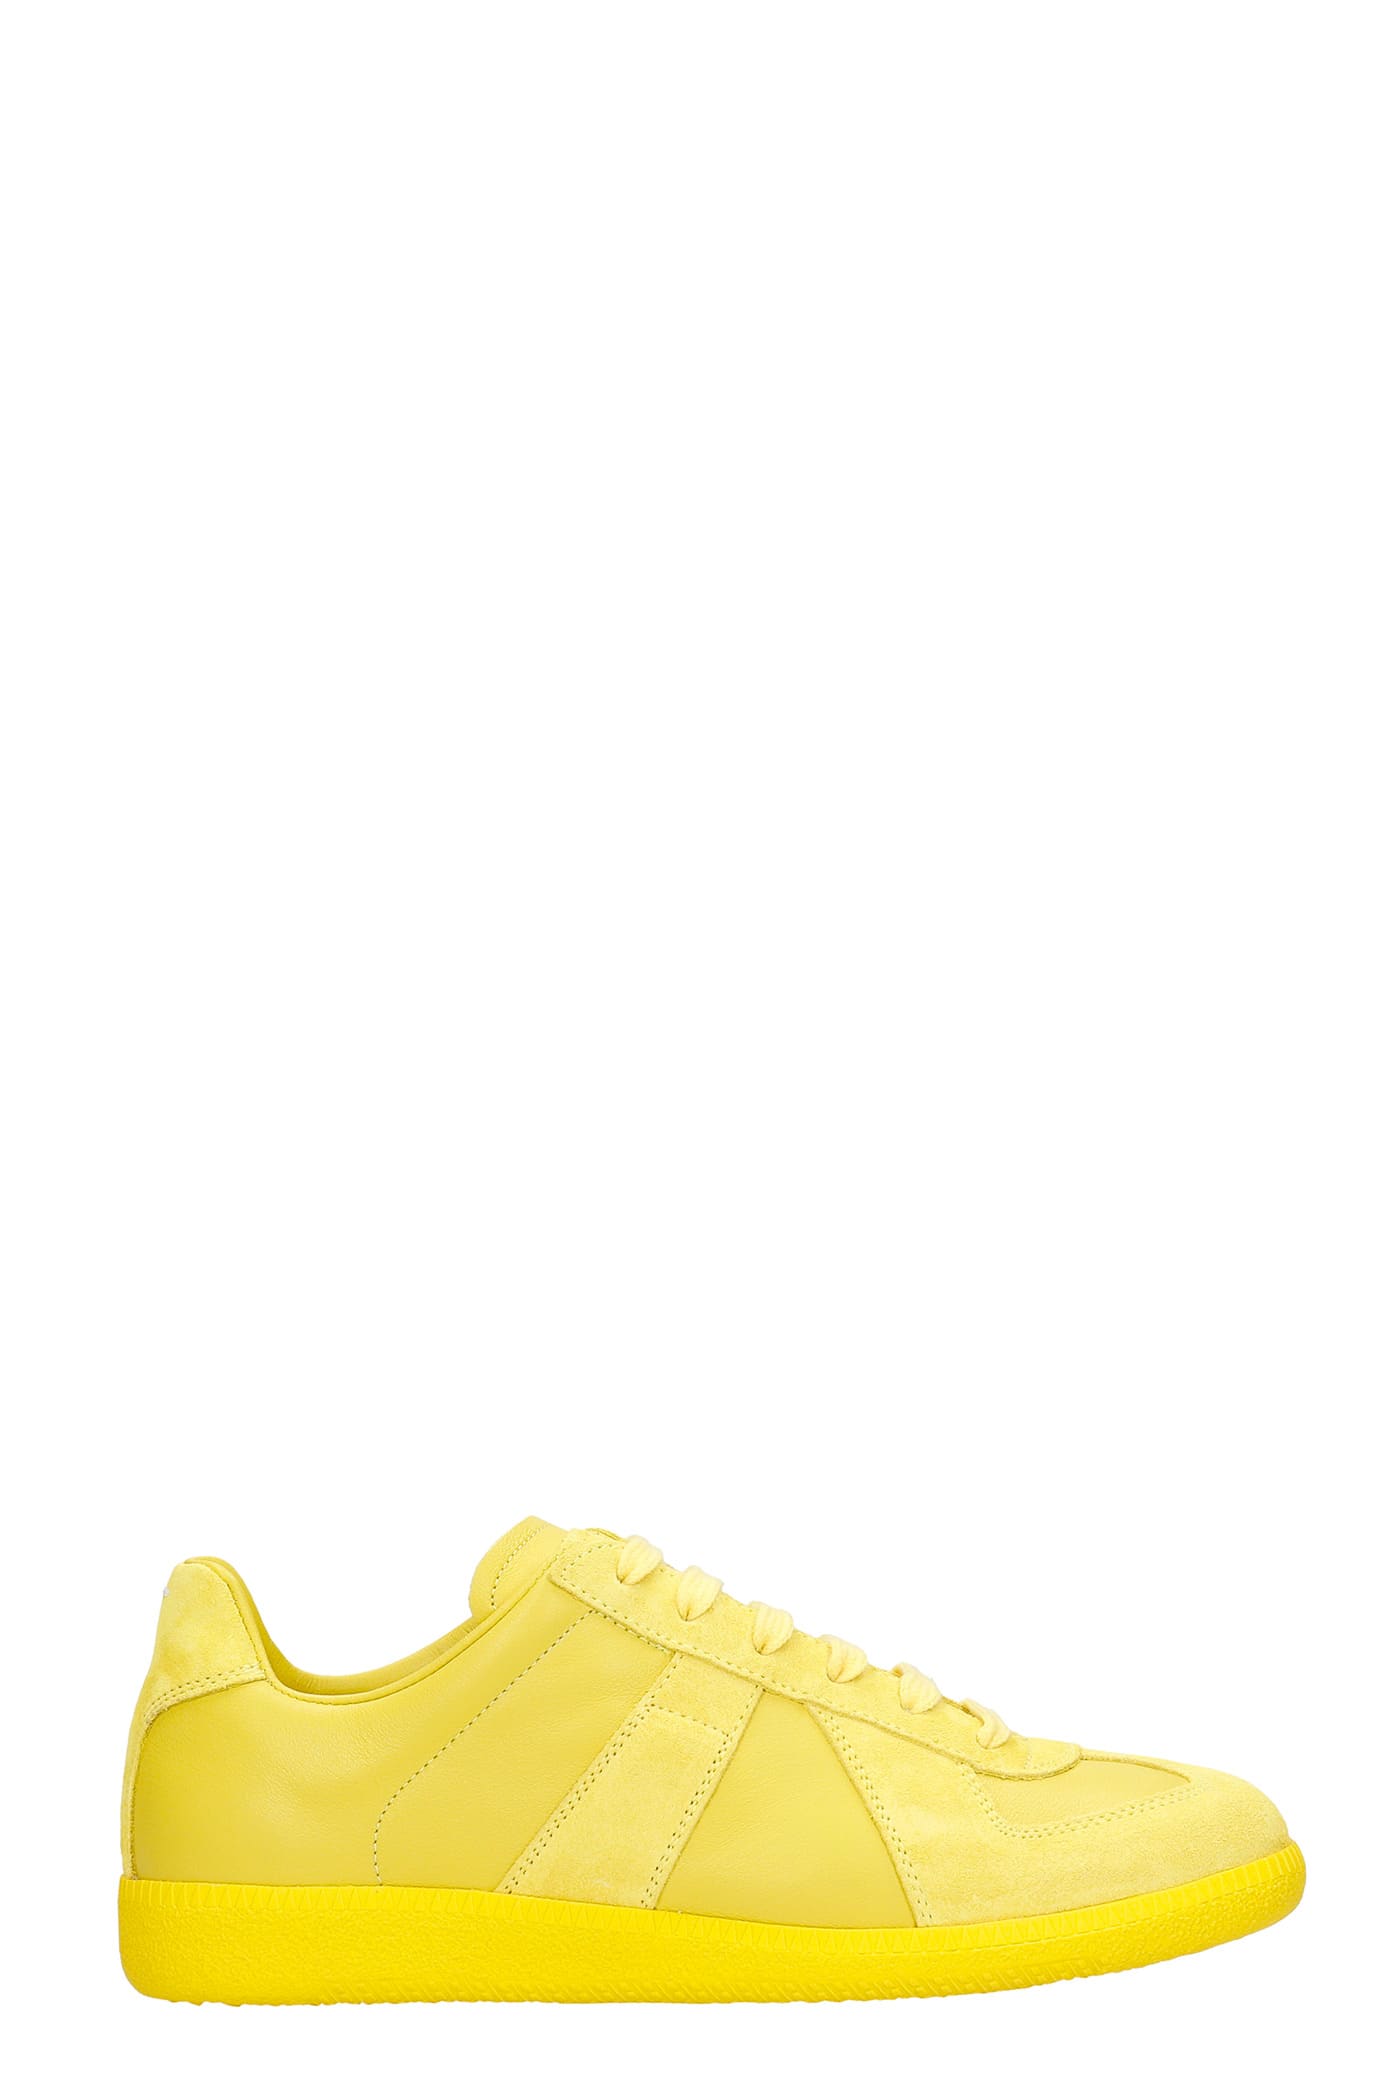 Maison Margiela Replica Sneakers In Yellow Suede And Leather